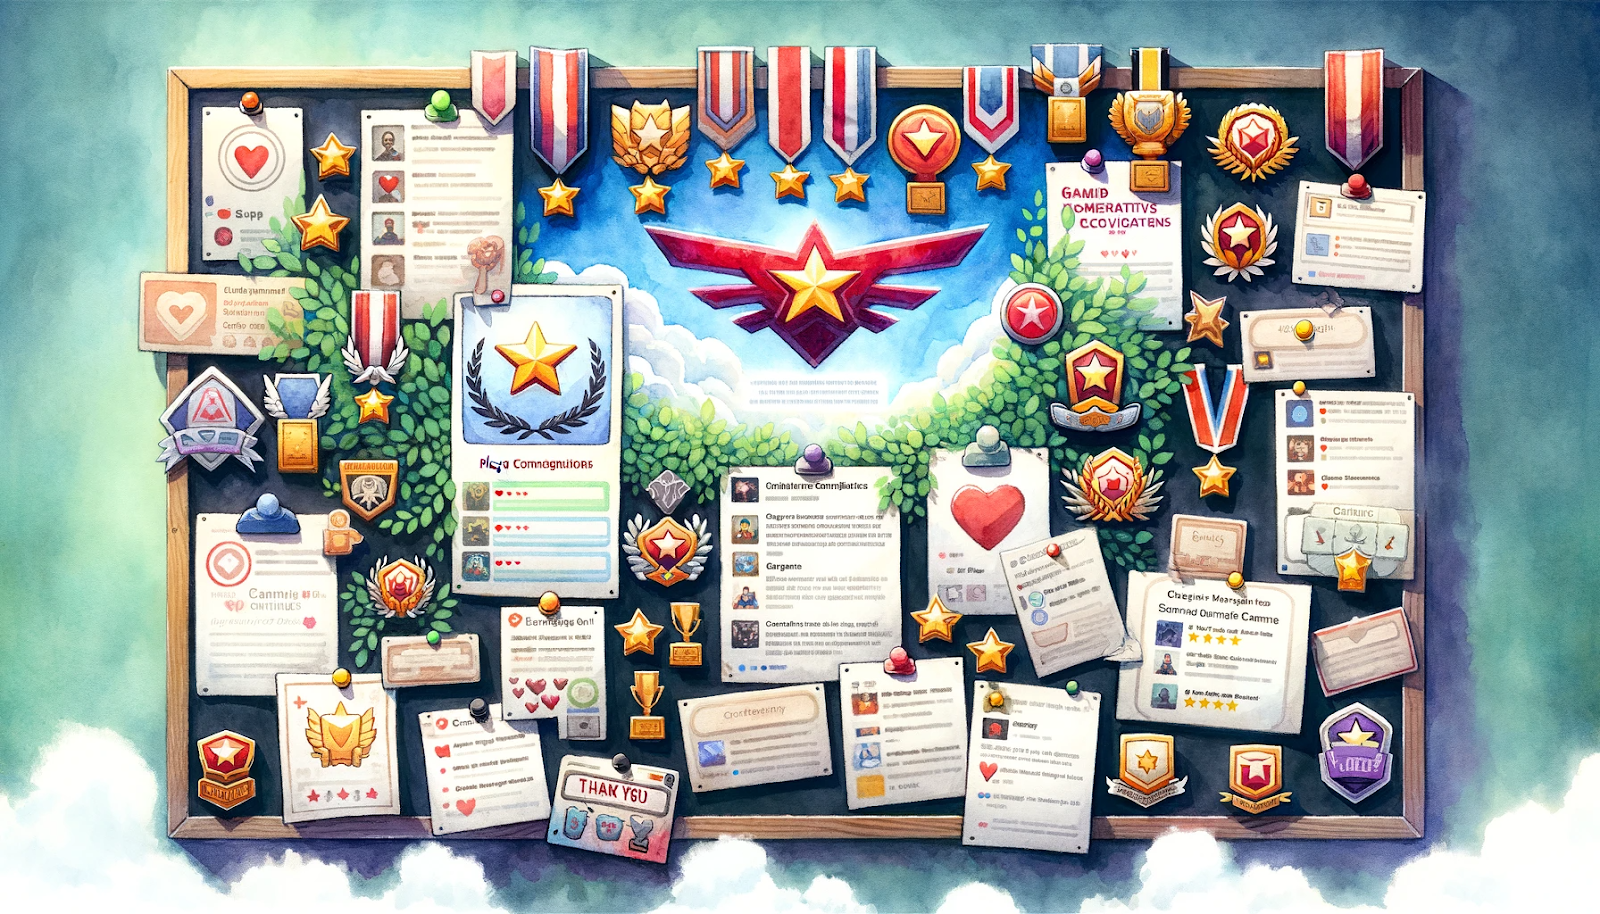 a digital bulletin board filled with accolades and recognitions from a gaming community. It showcases player achievements, positive contributions, and rewards, including badges, trophies, and thank-you notes, creating a celebratory and appreciative environment.